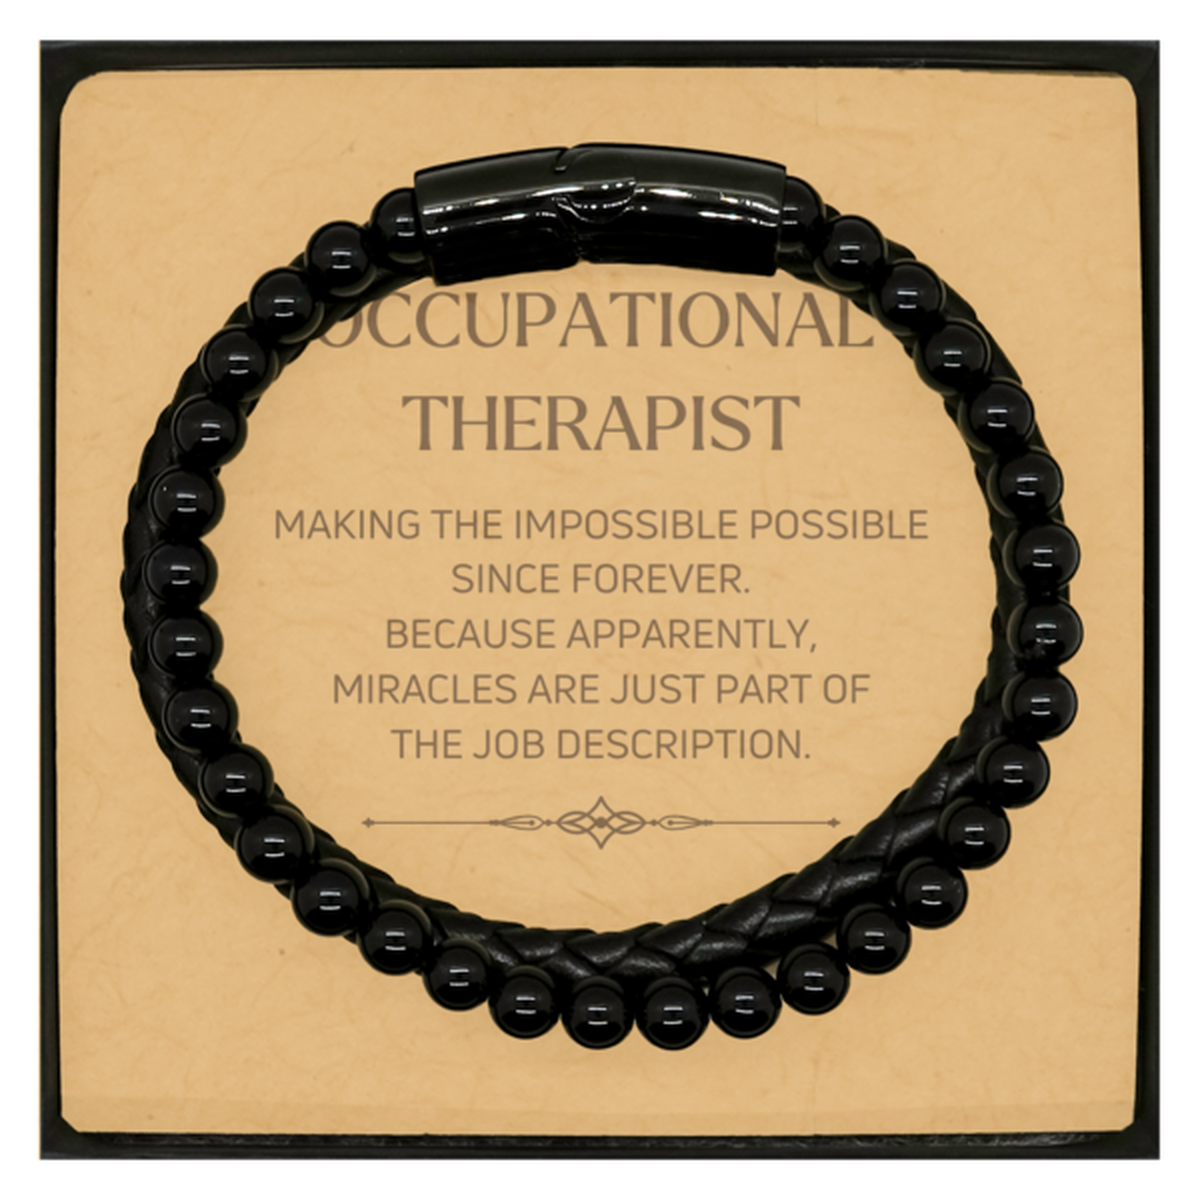 Funny Occupational Therapist Gifts, Miracles are just part of the job description, Inspirational Birthday Christmas Stone Leather Bracelets For Occupational Therapist, Men, Women, Coworkers, Friends, Boss